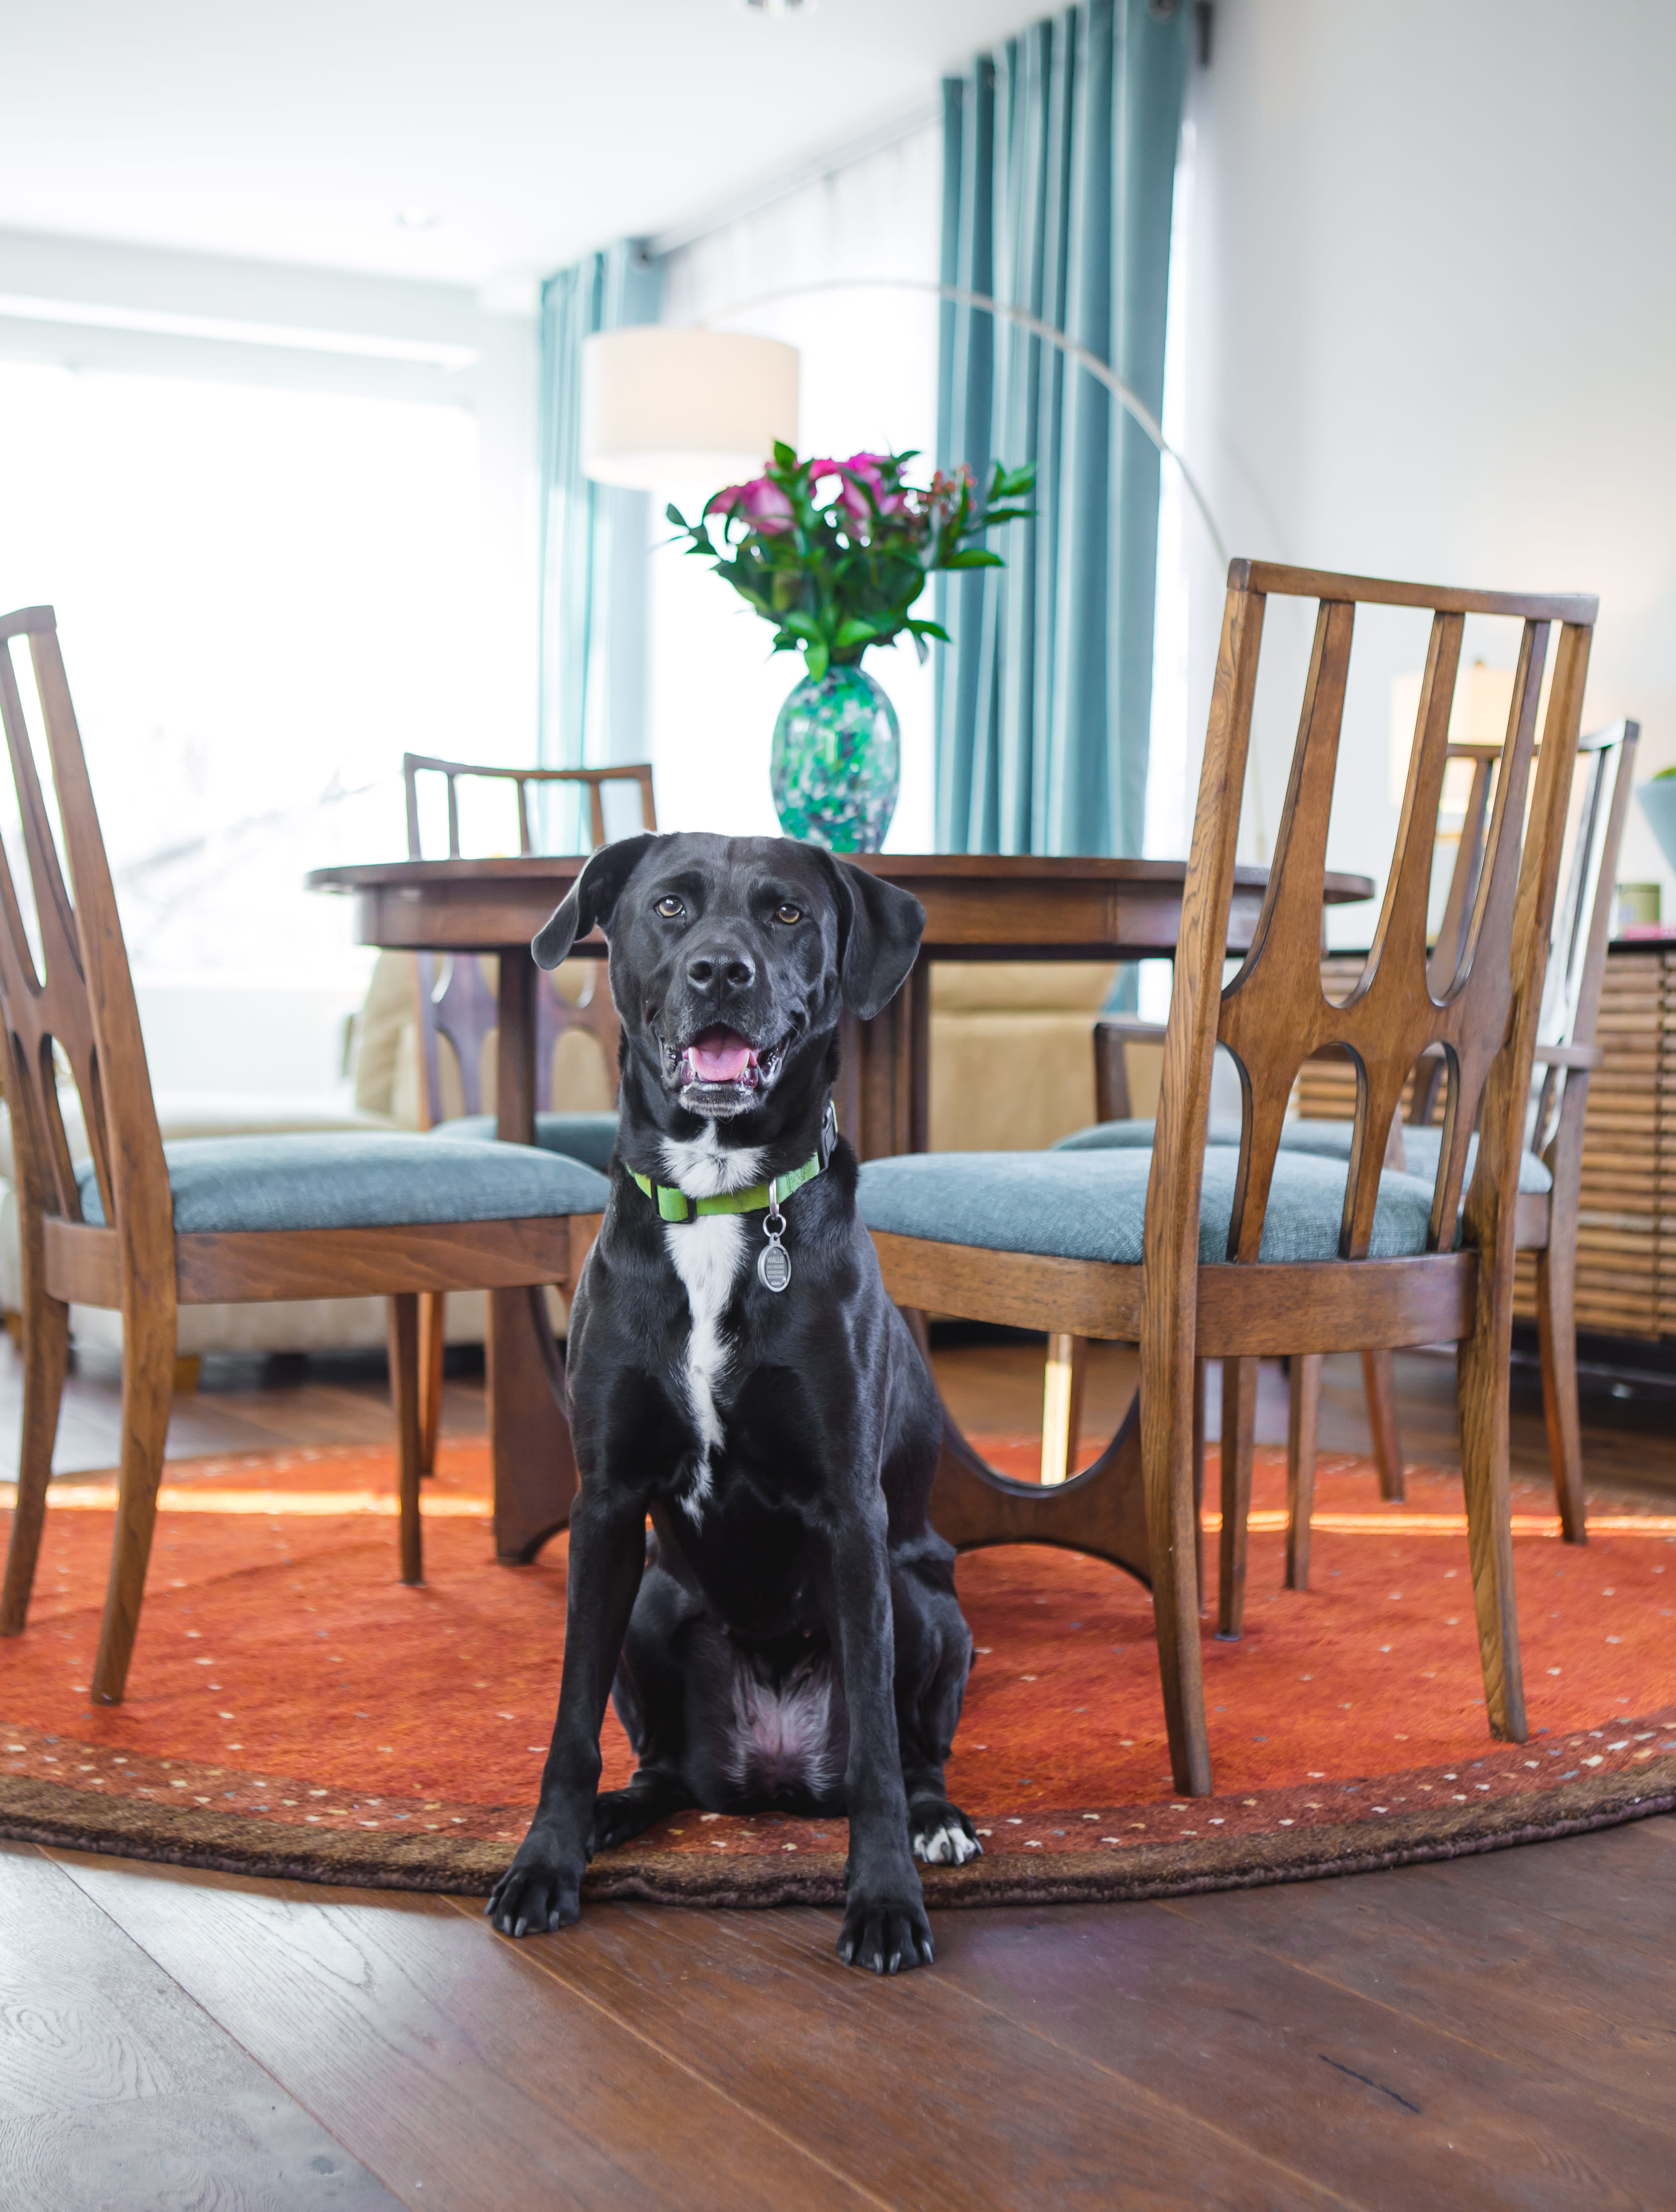 You’ll be sharing some spaces with the homeowner and his friendly lab, Wallie.